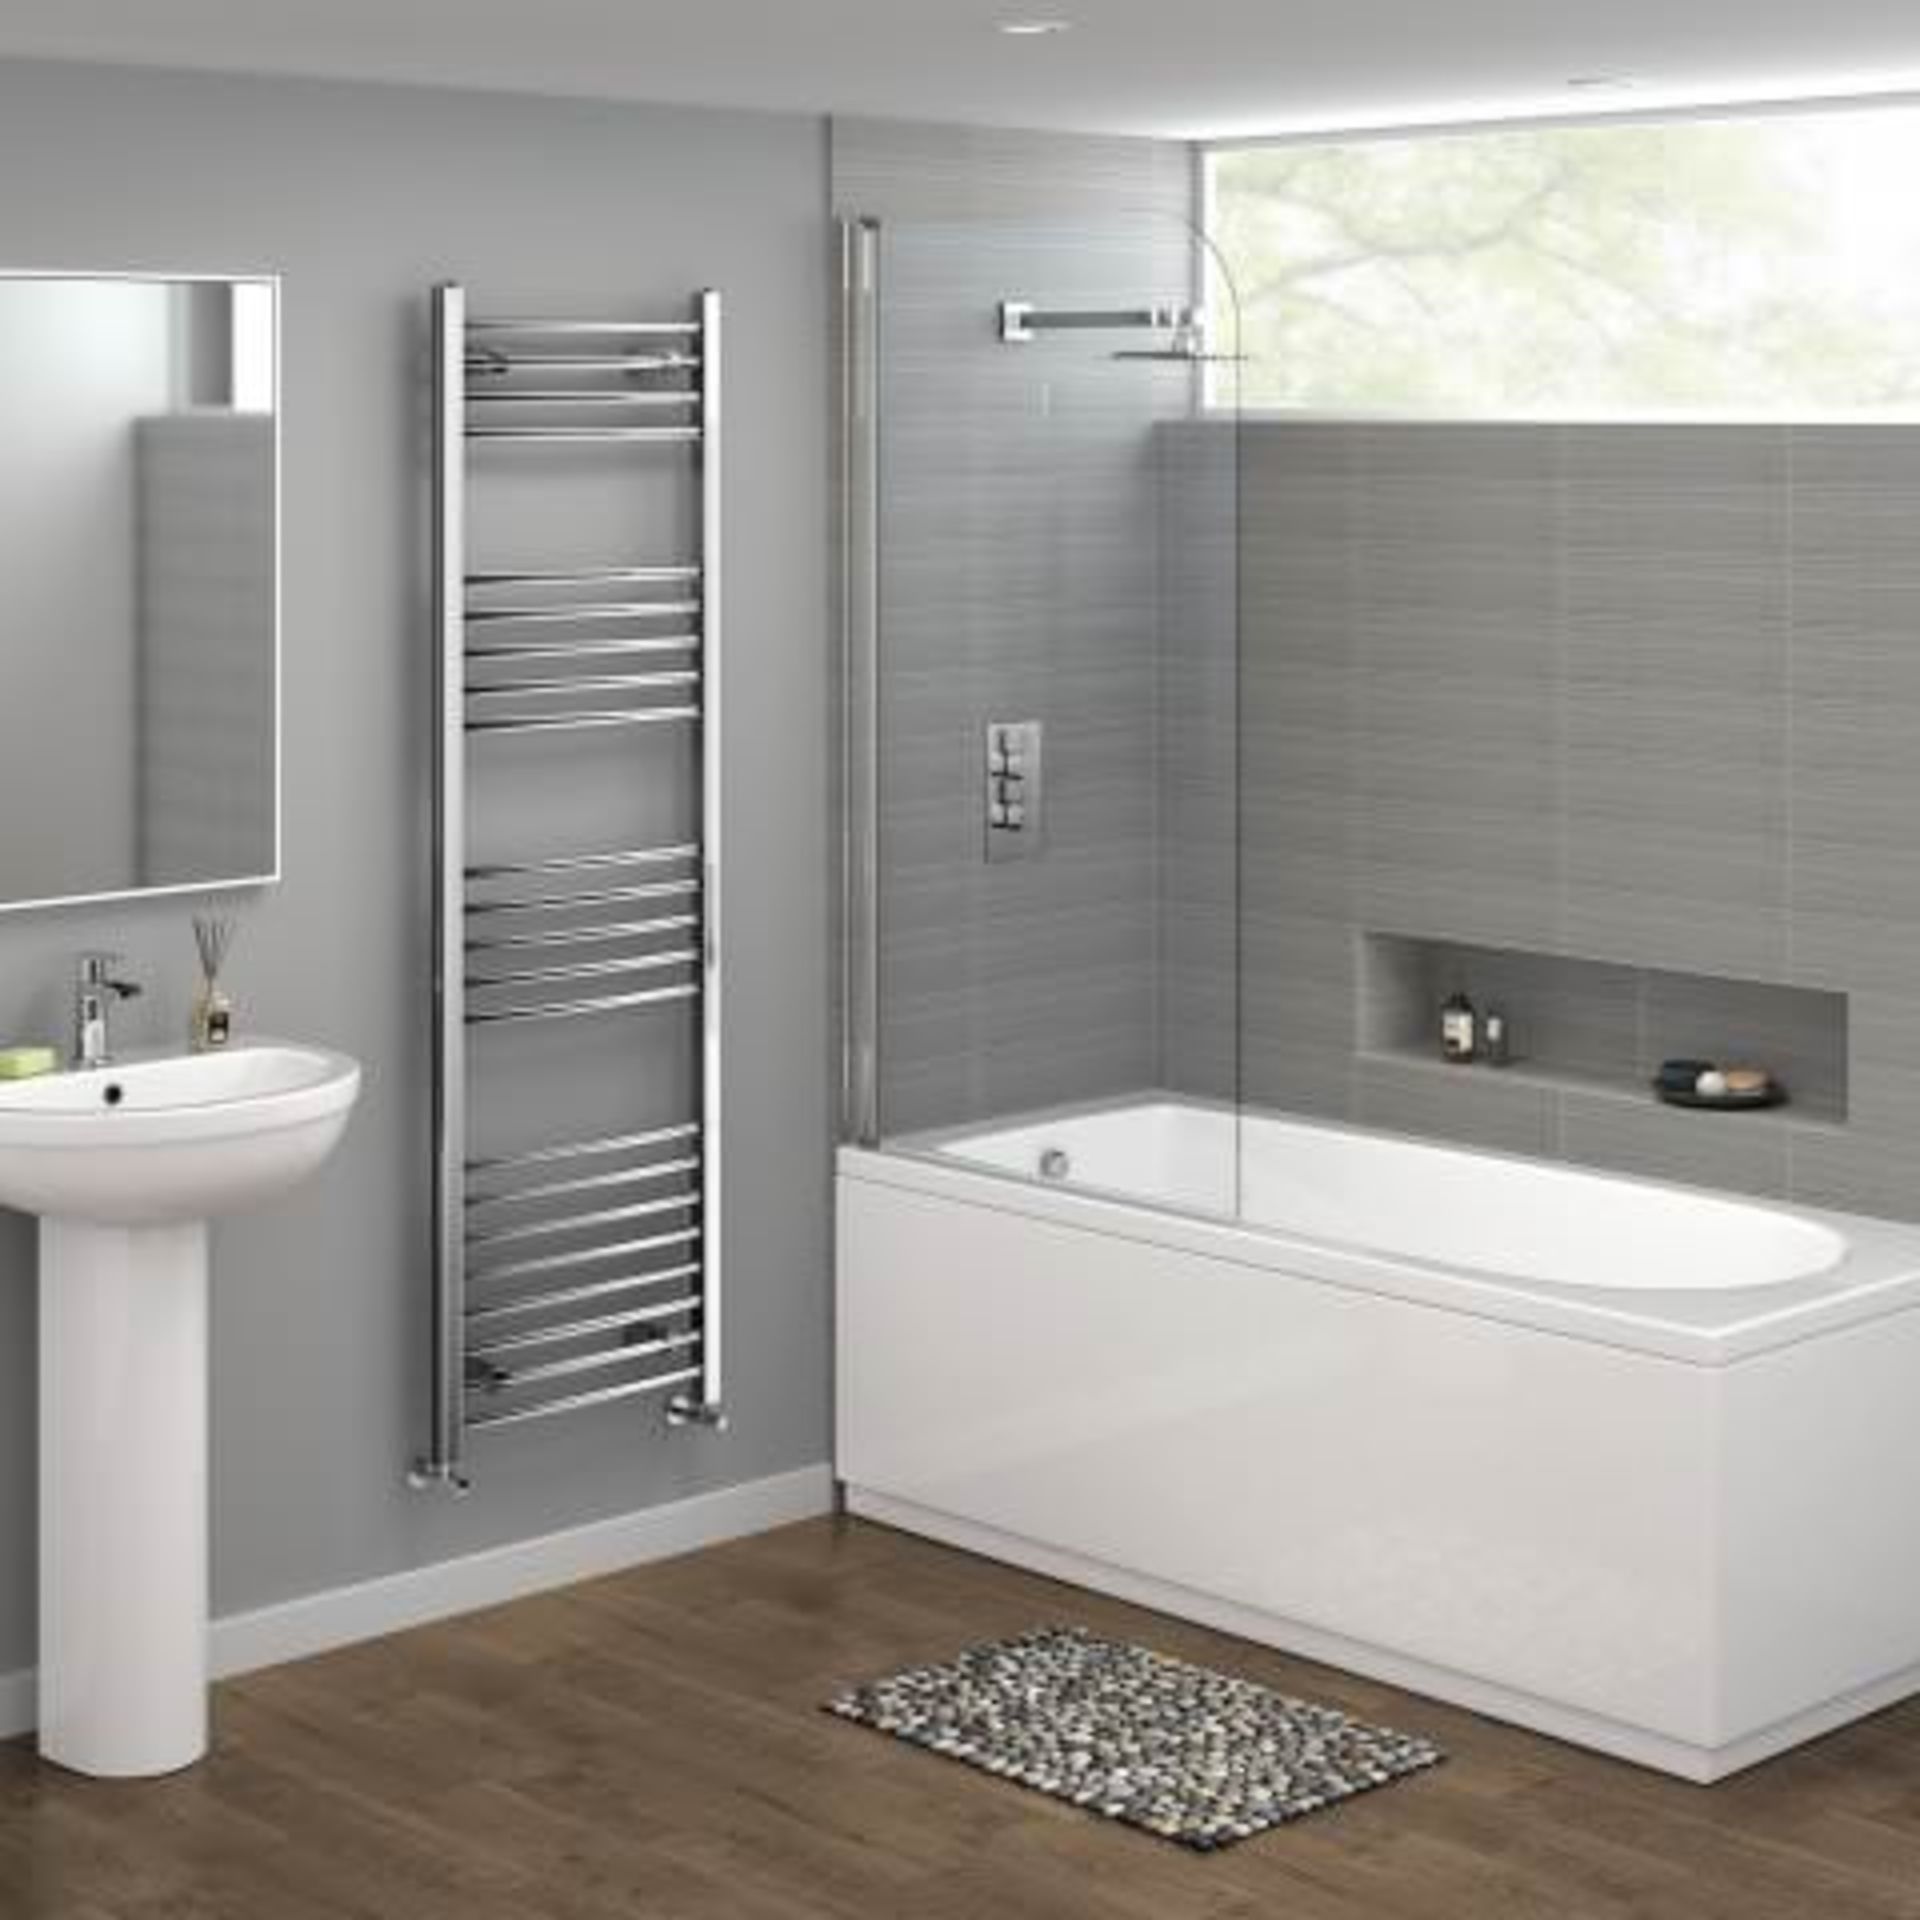 (H11) 1600x500mm - 20mm Tubes - Chrome Curved Rail Ladder Towel Radiator RRP £132.78 Our Nancy - Image 2 of 4